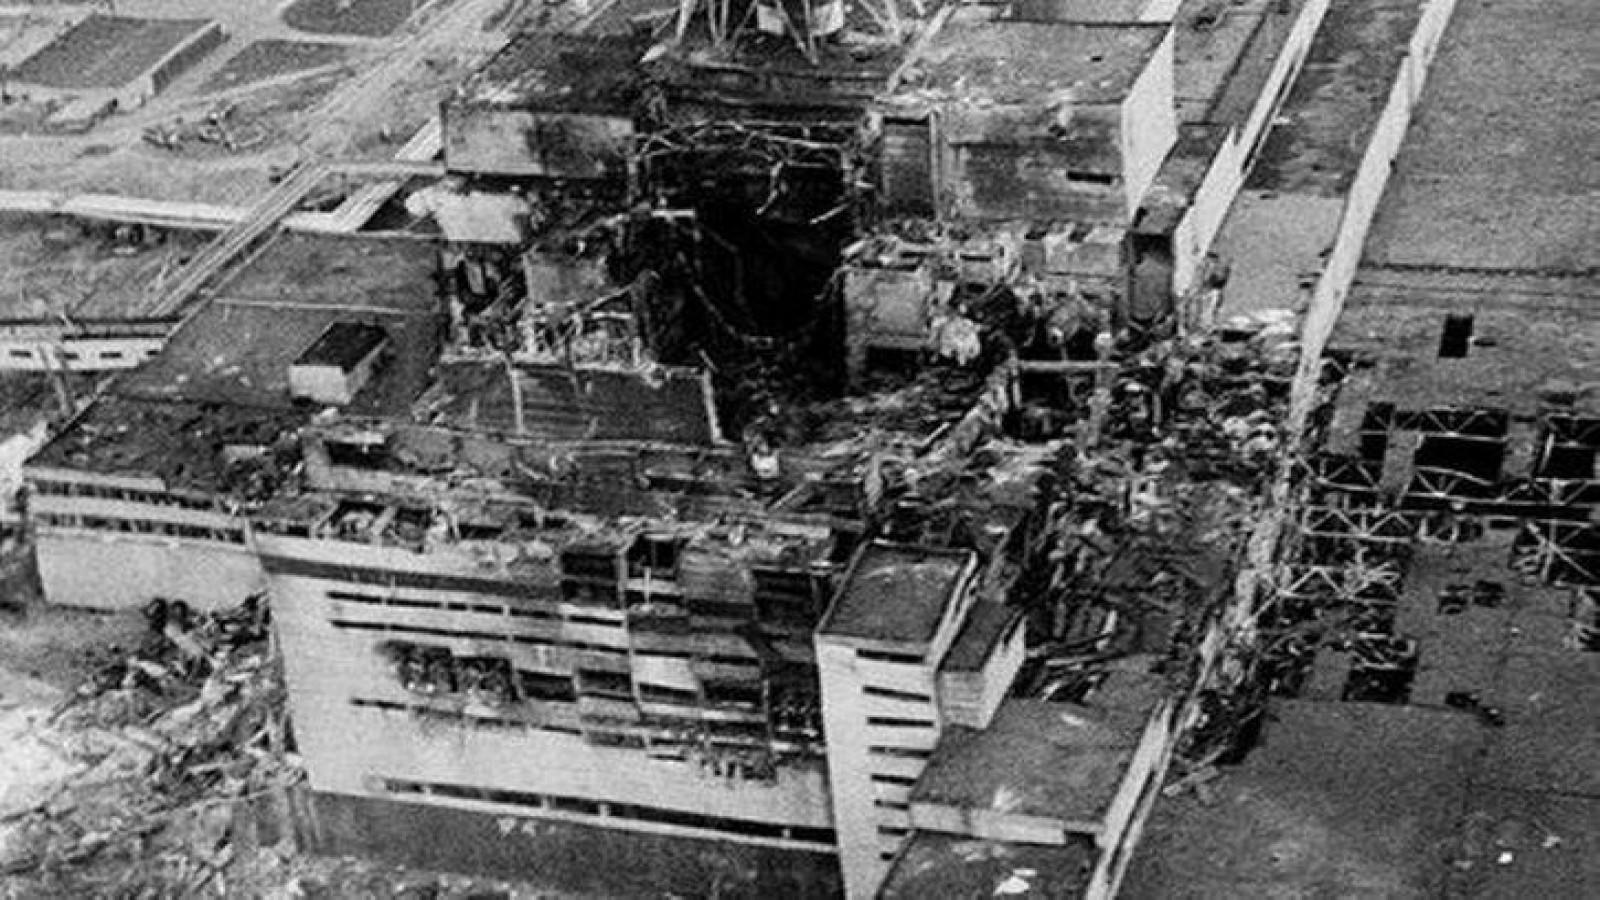 On This Day: Chernobyl Nuclear Disaster The World's Worst, 43% OFF